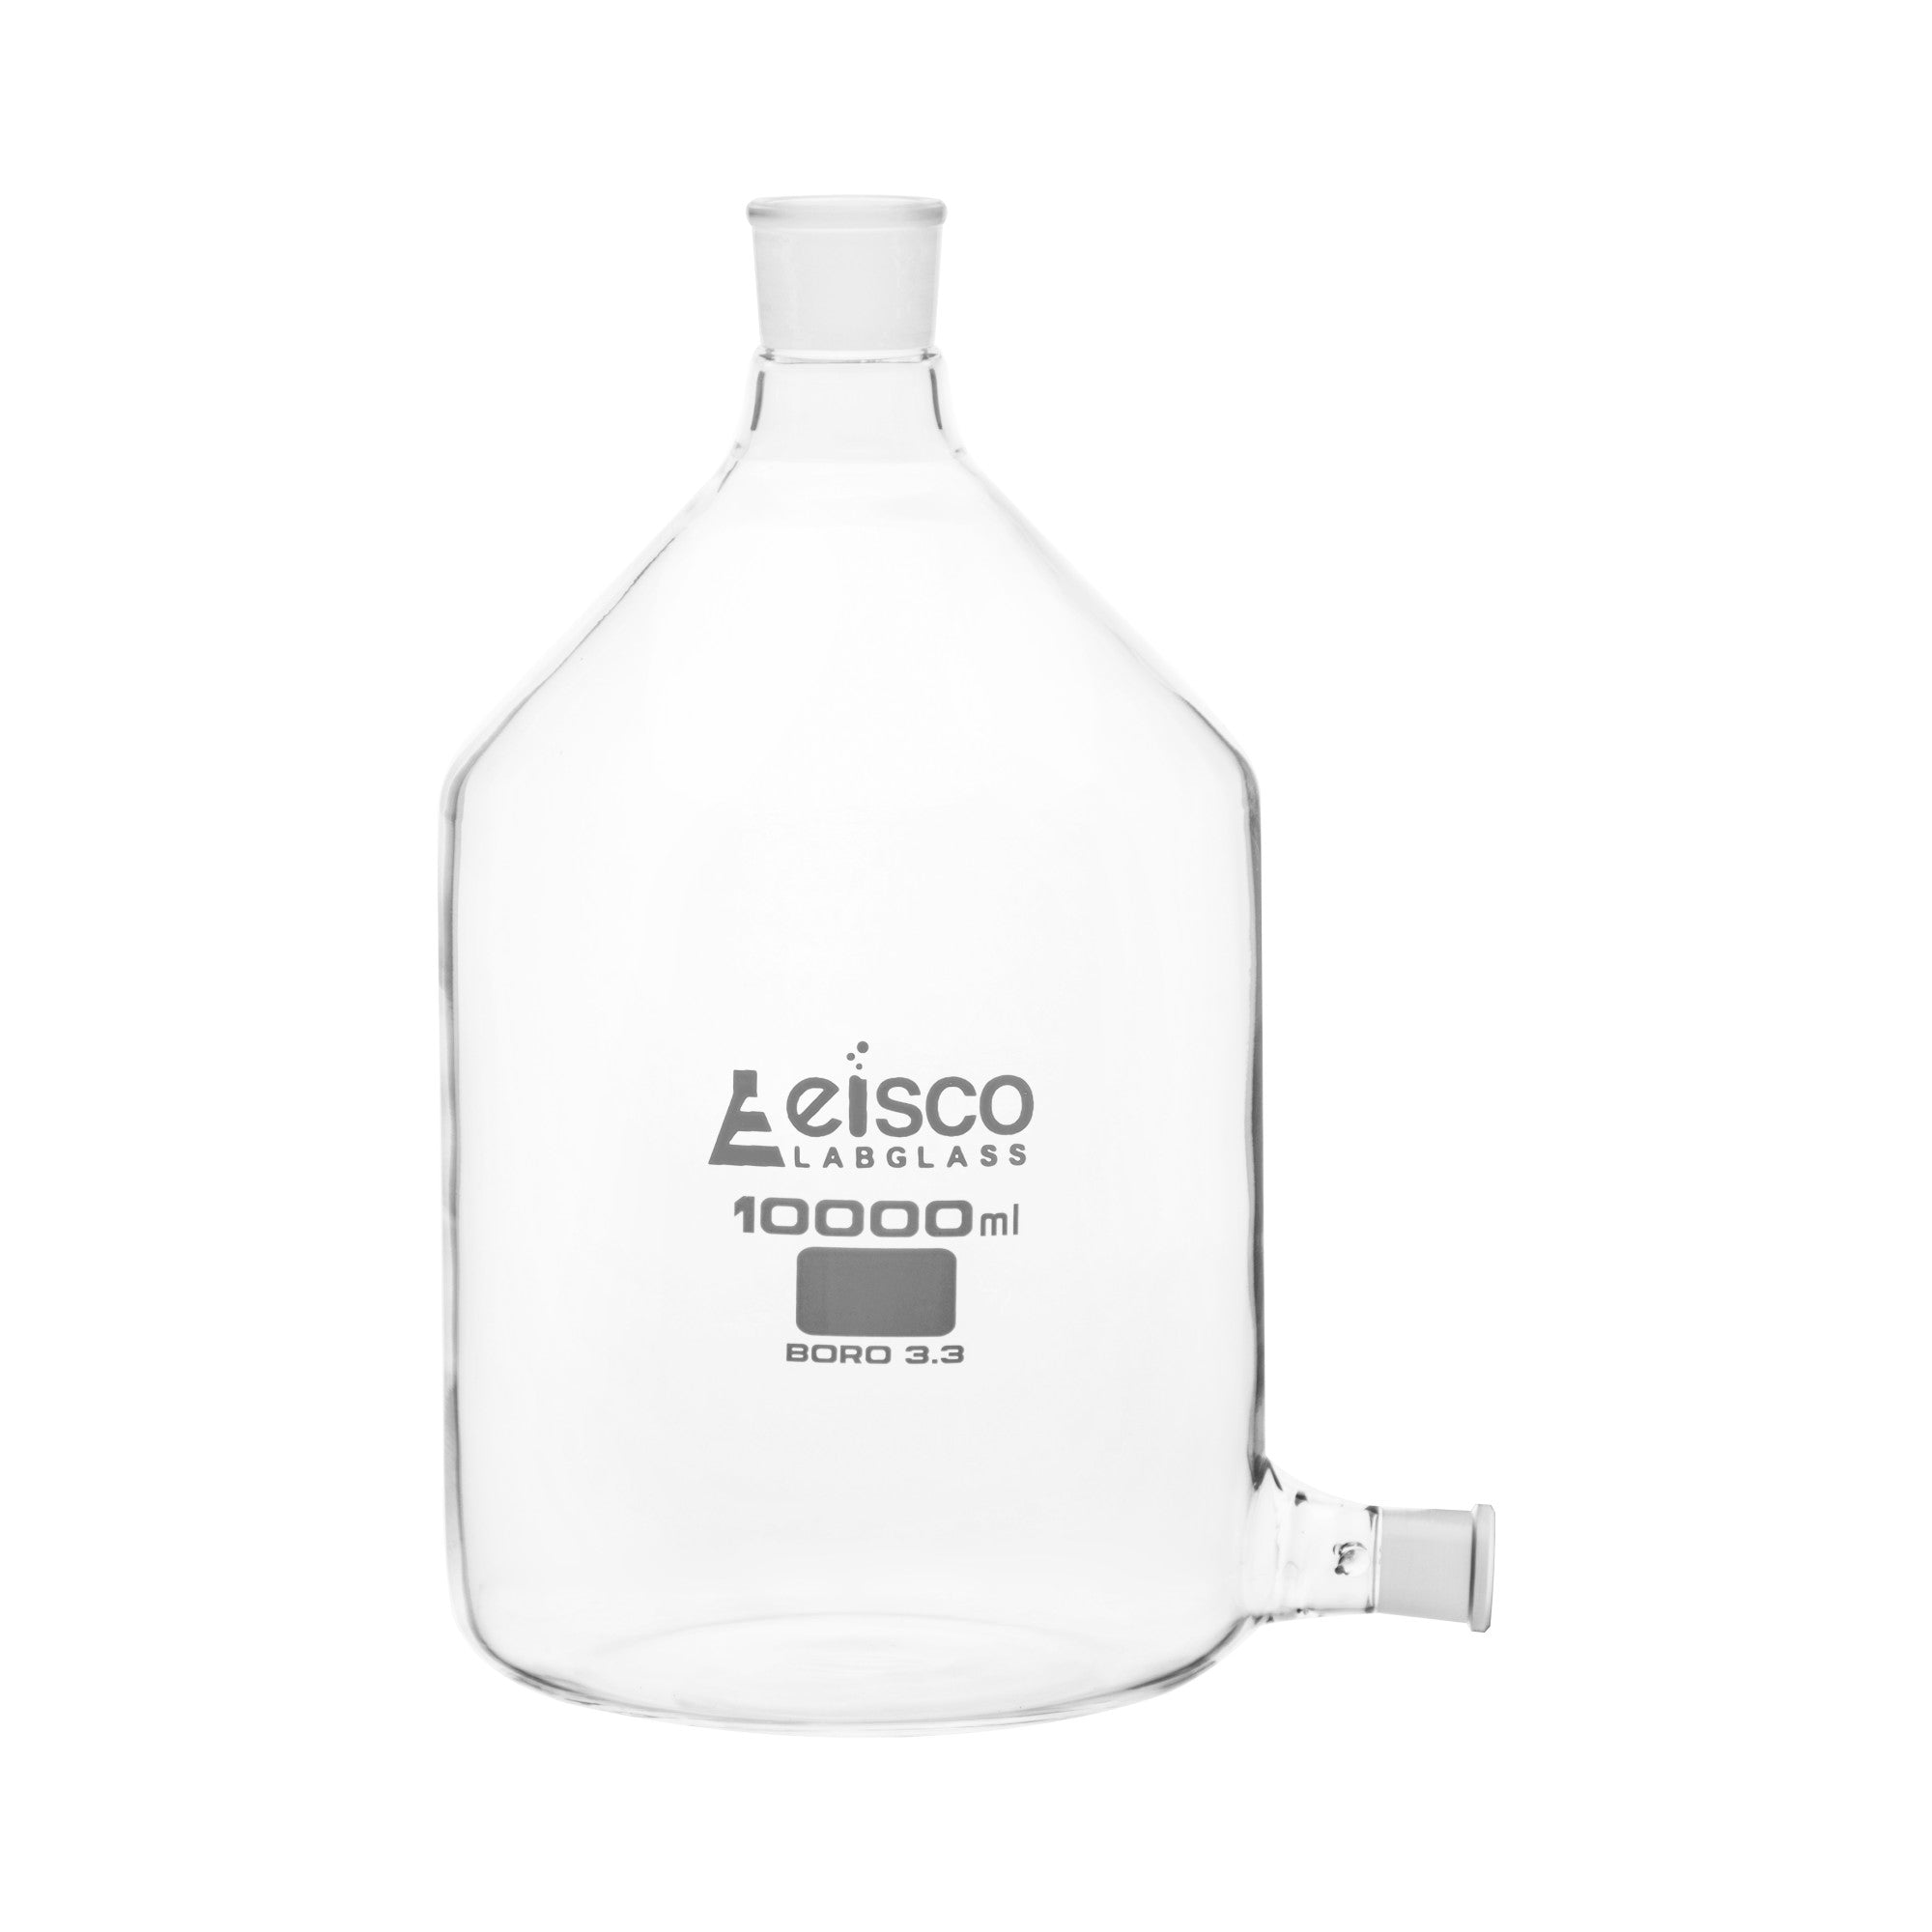 Borosilicate Aspirator Bottle with Outlet for Stopcock, 10000ml, Autoclavable